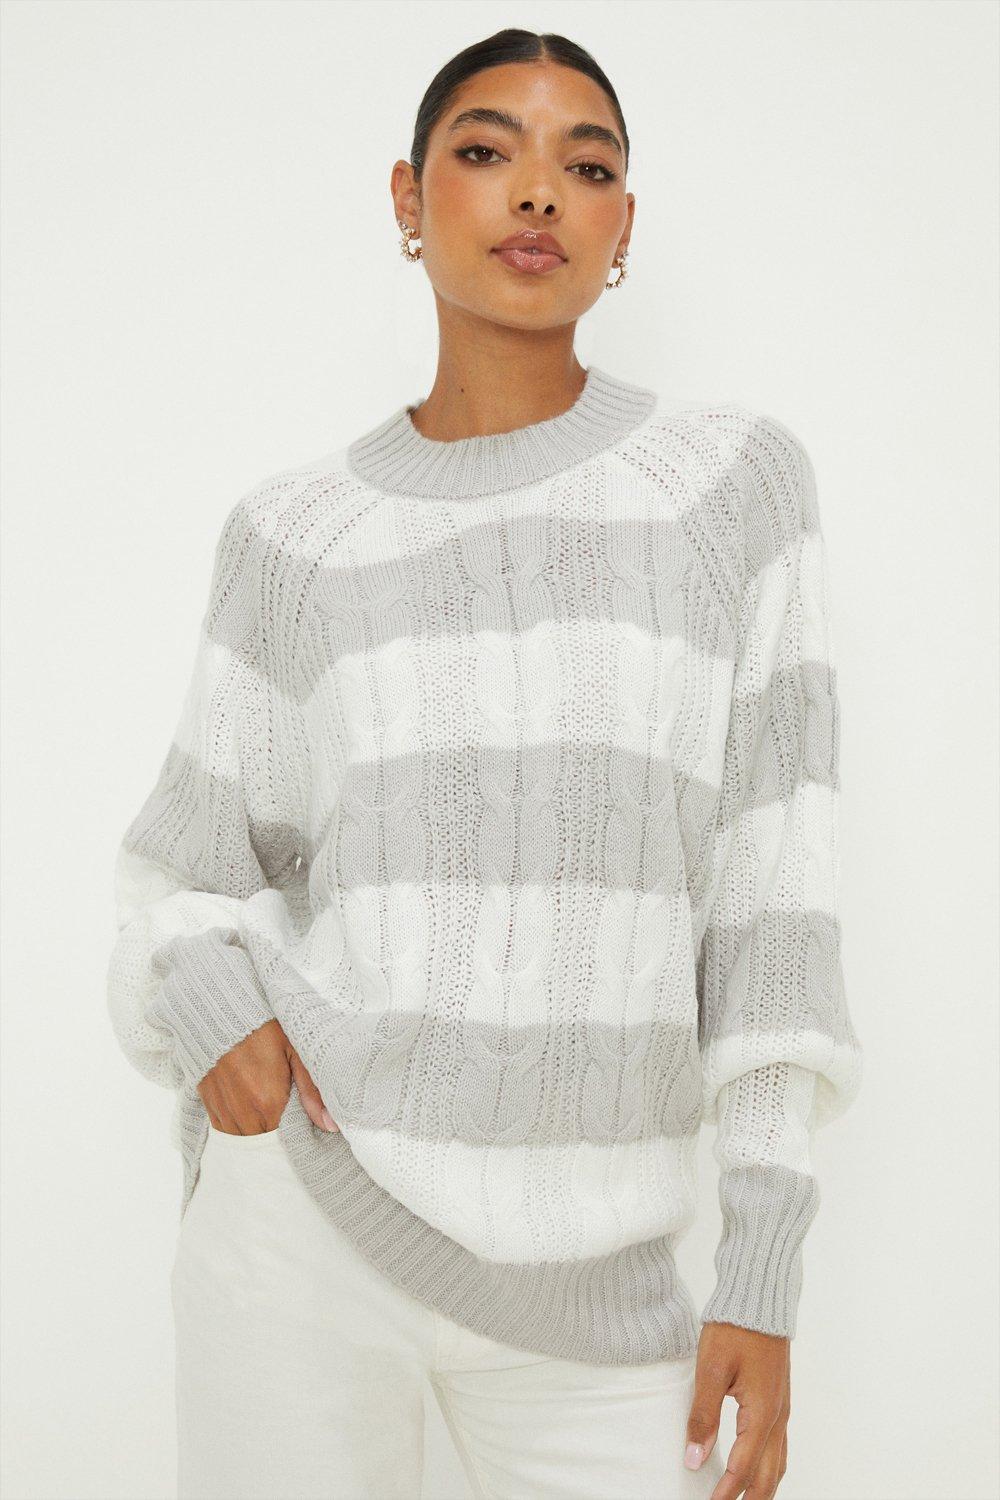 Women's Stripe Cable High Neck Tunic Jumper - grey - XL